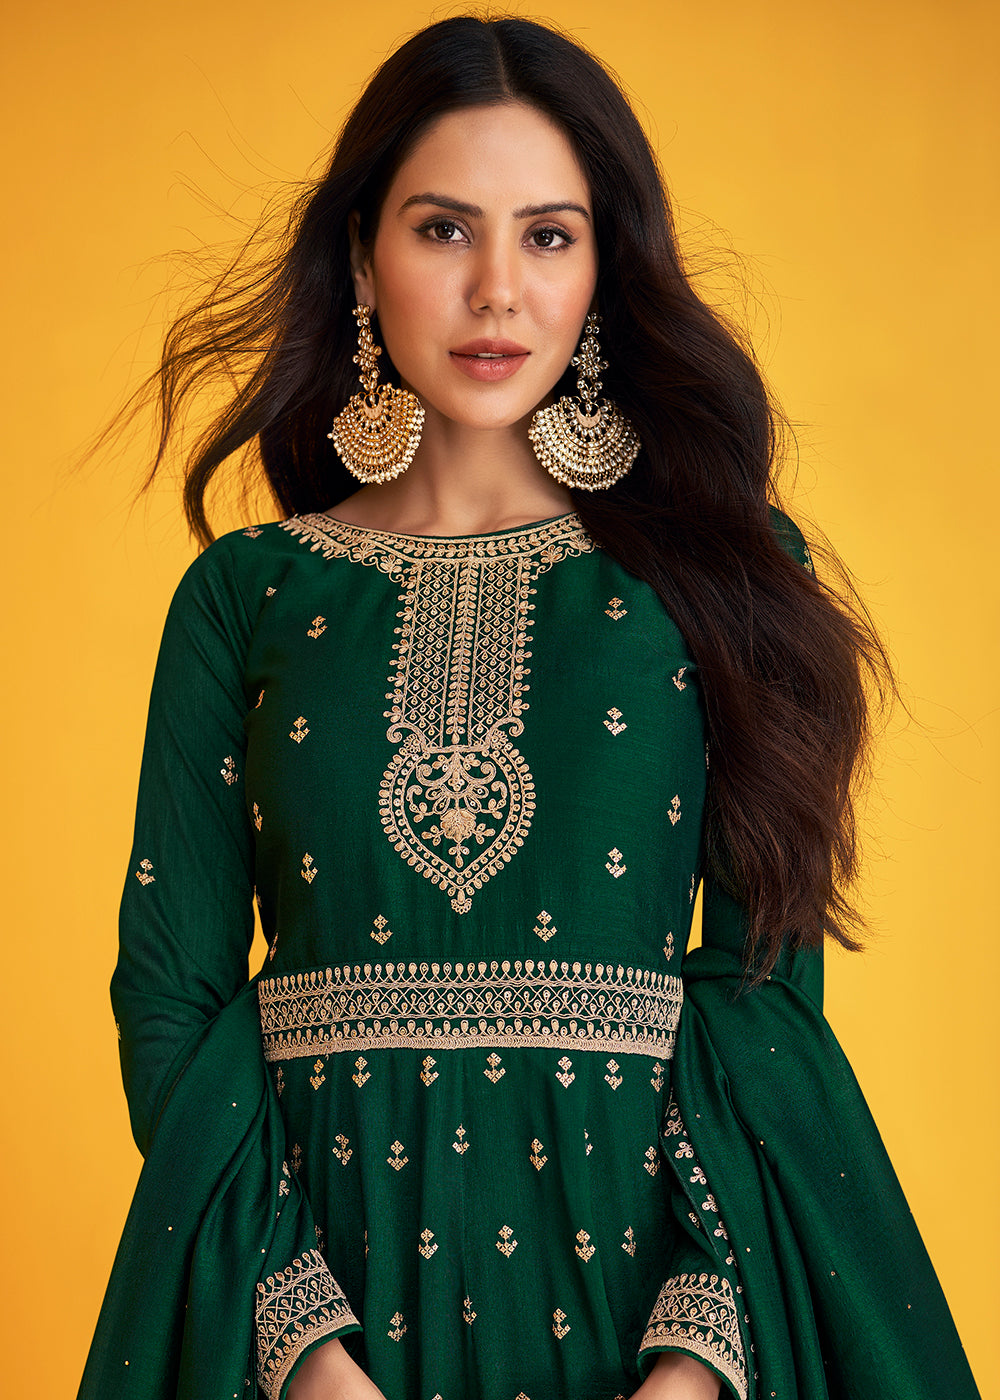 Shop Now Amazing Green Silk Festive Anarkali Suit Online featuring Sonam Bajwa at Empress Clothing in USA.